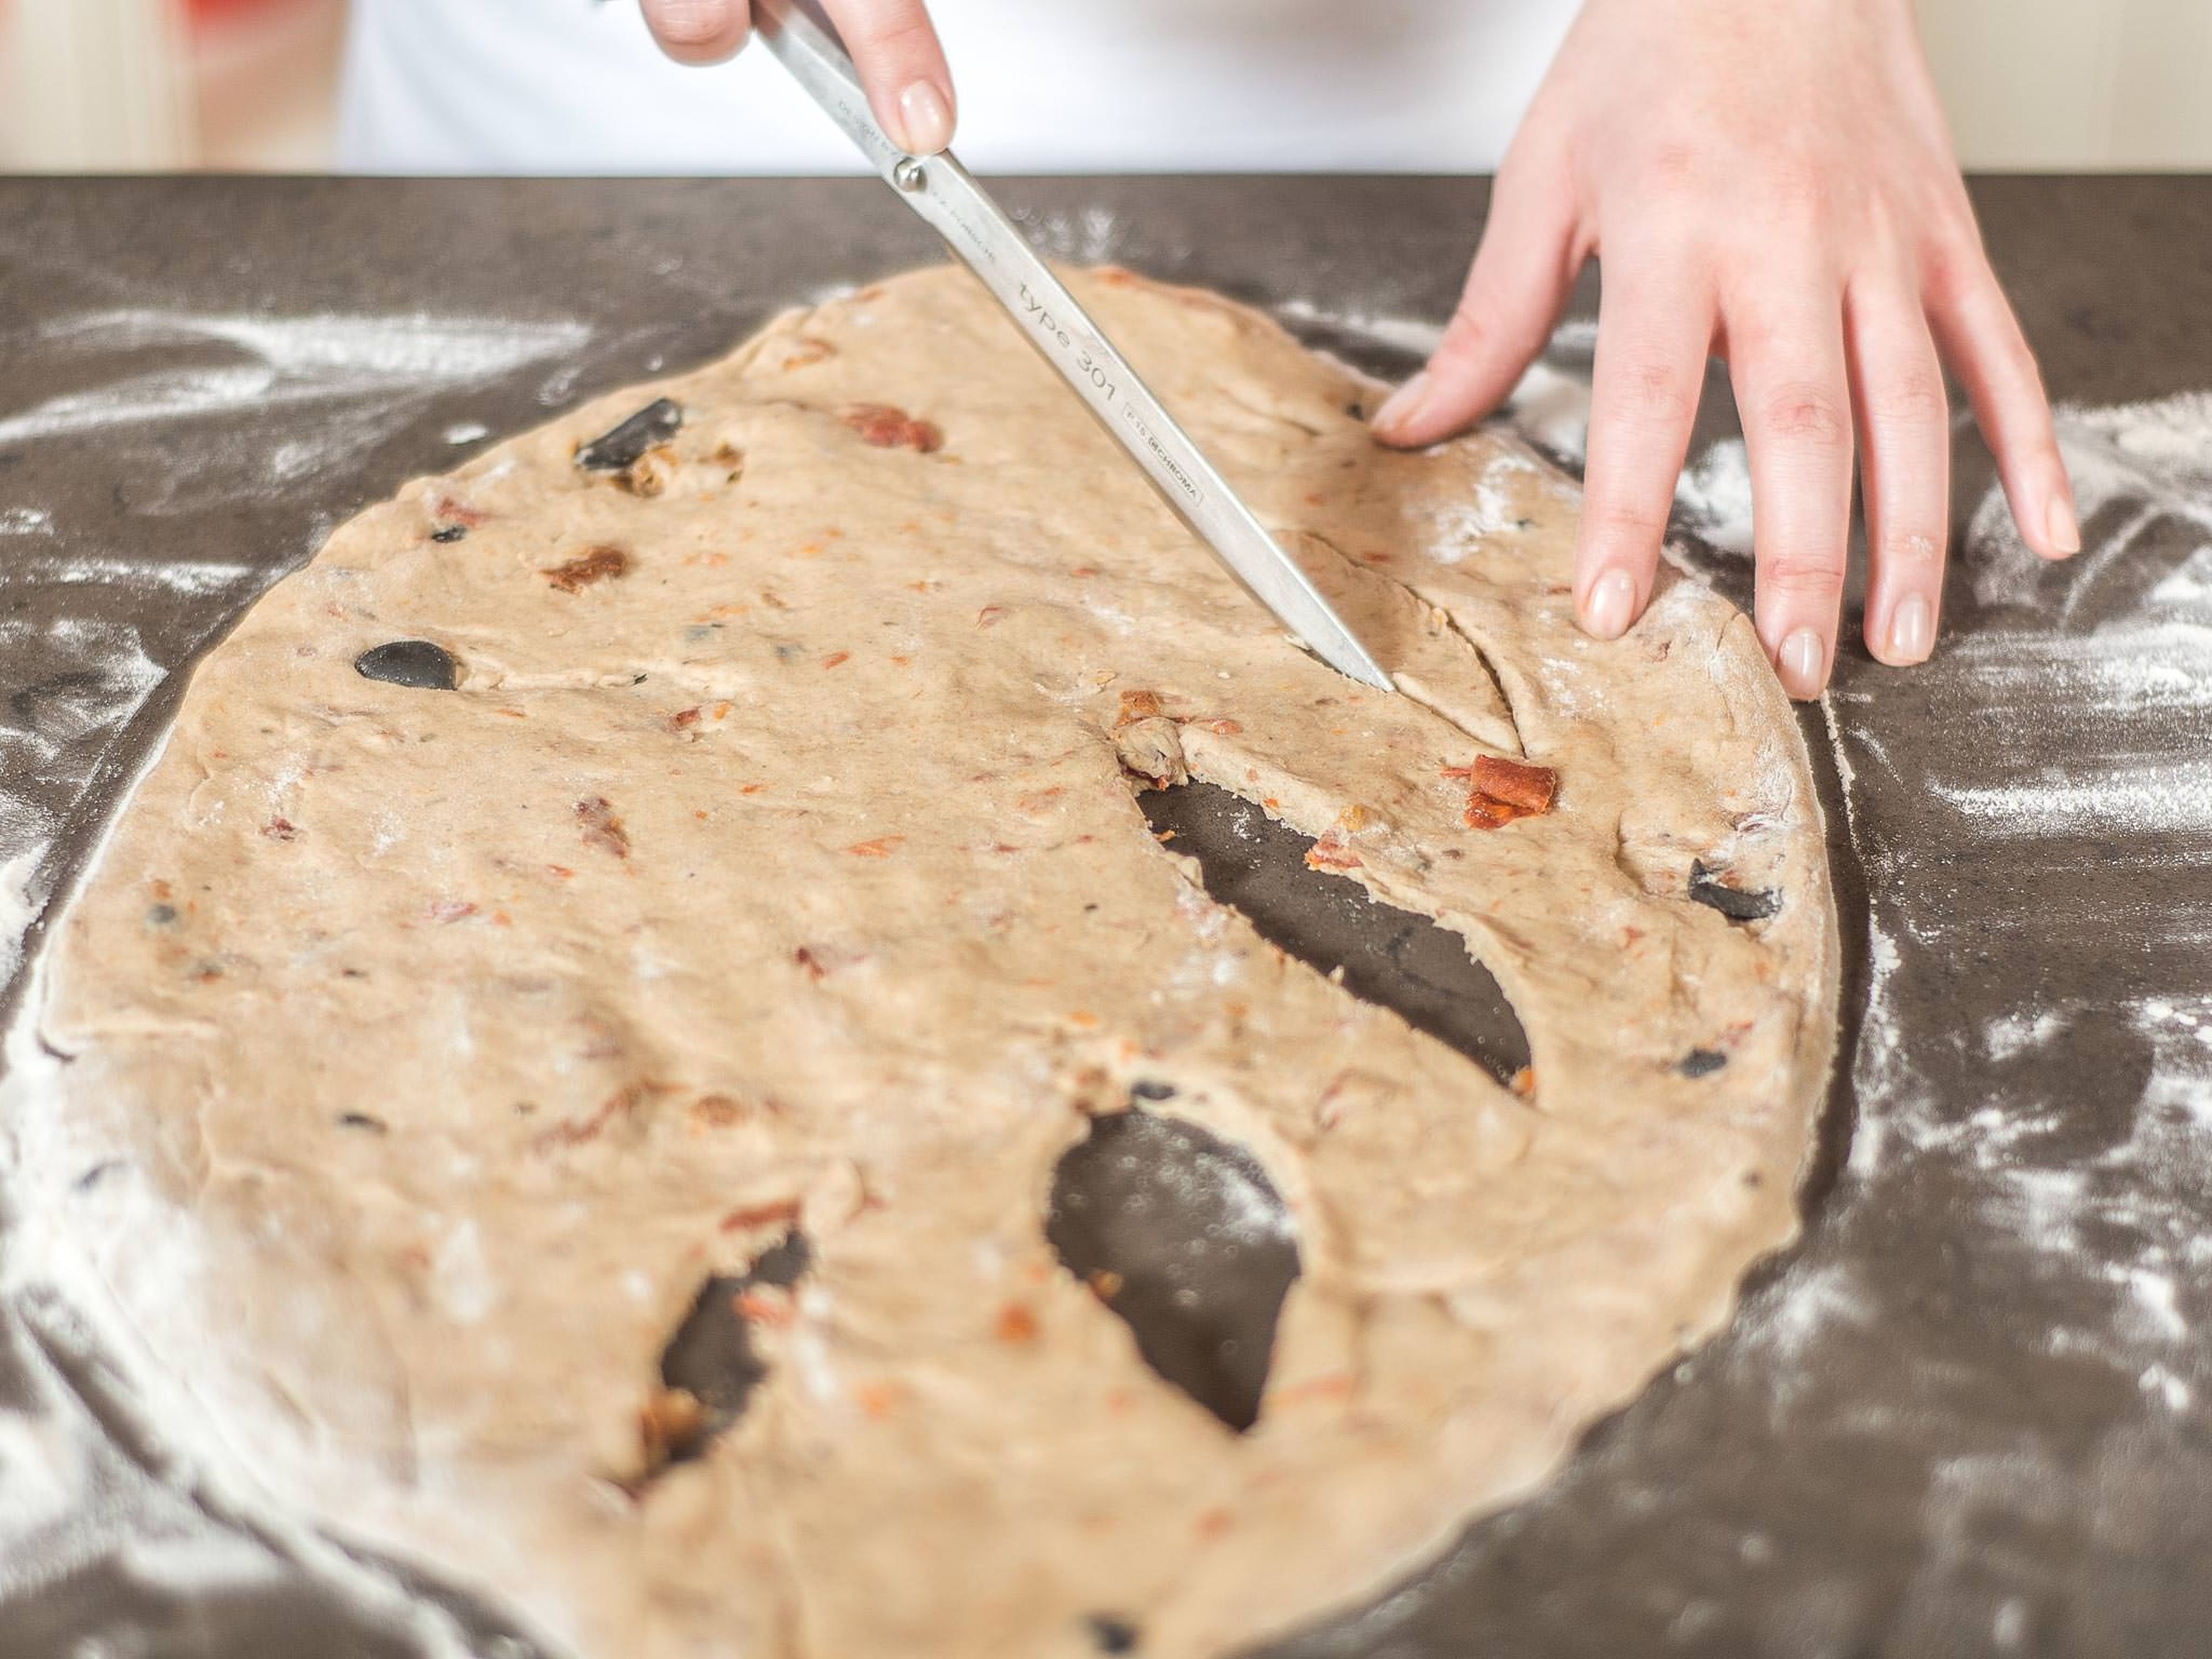 Using a sharp knife, cut out individual sections of the dough. Transfer the fougasse onto a baking rack, cover and leave to rise in a warm place for approx. 20 min.